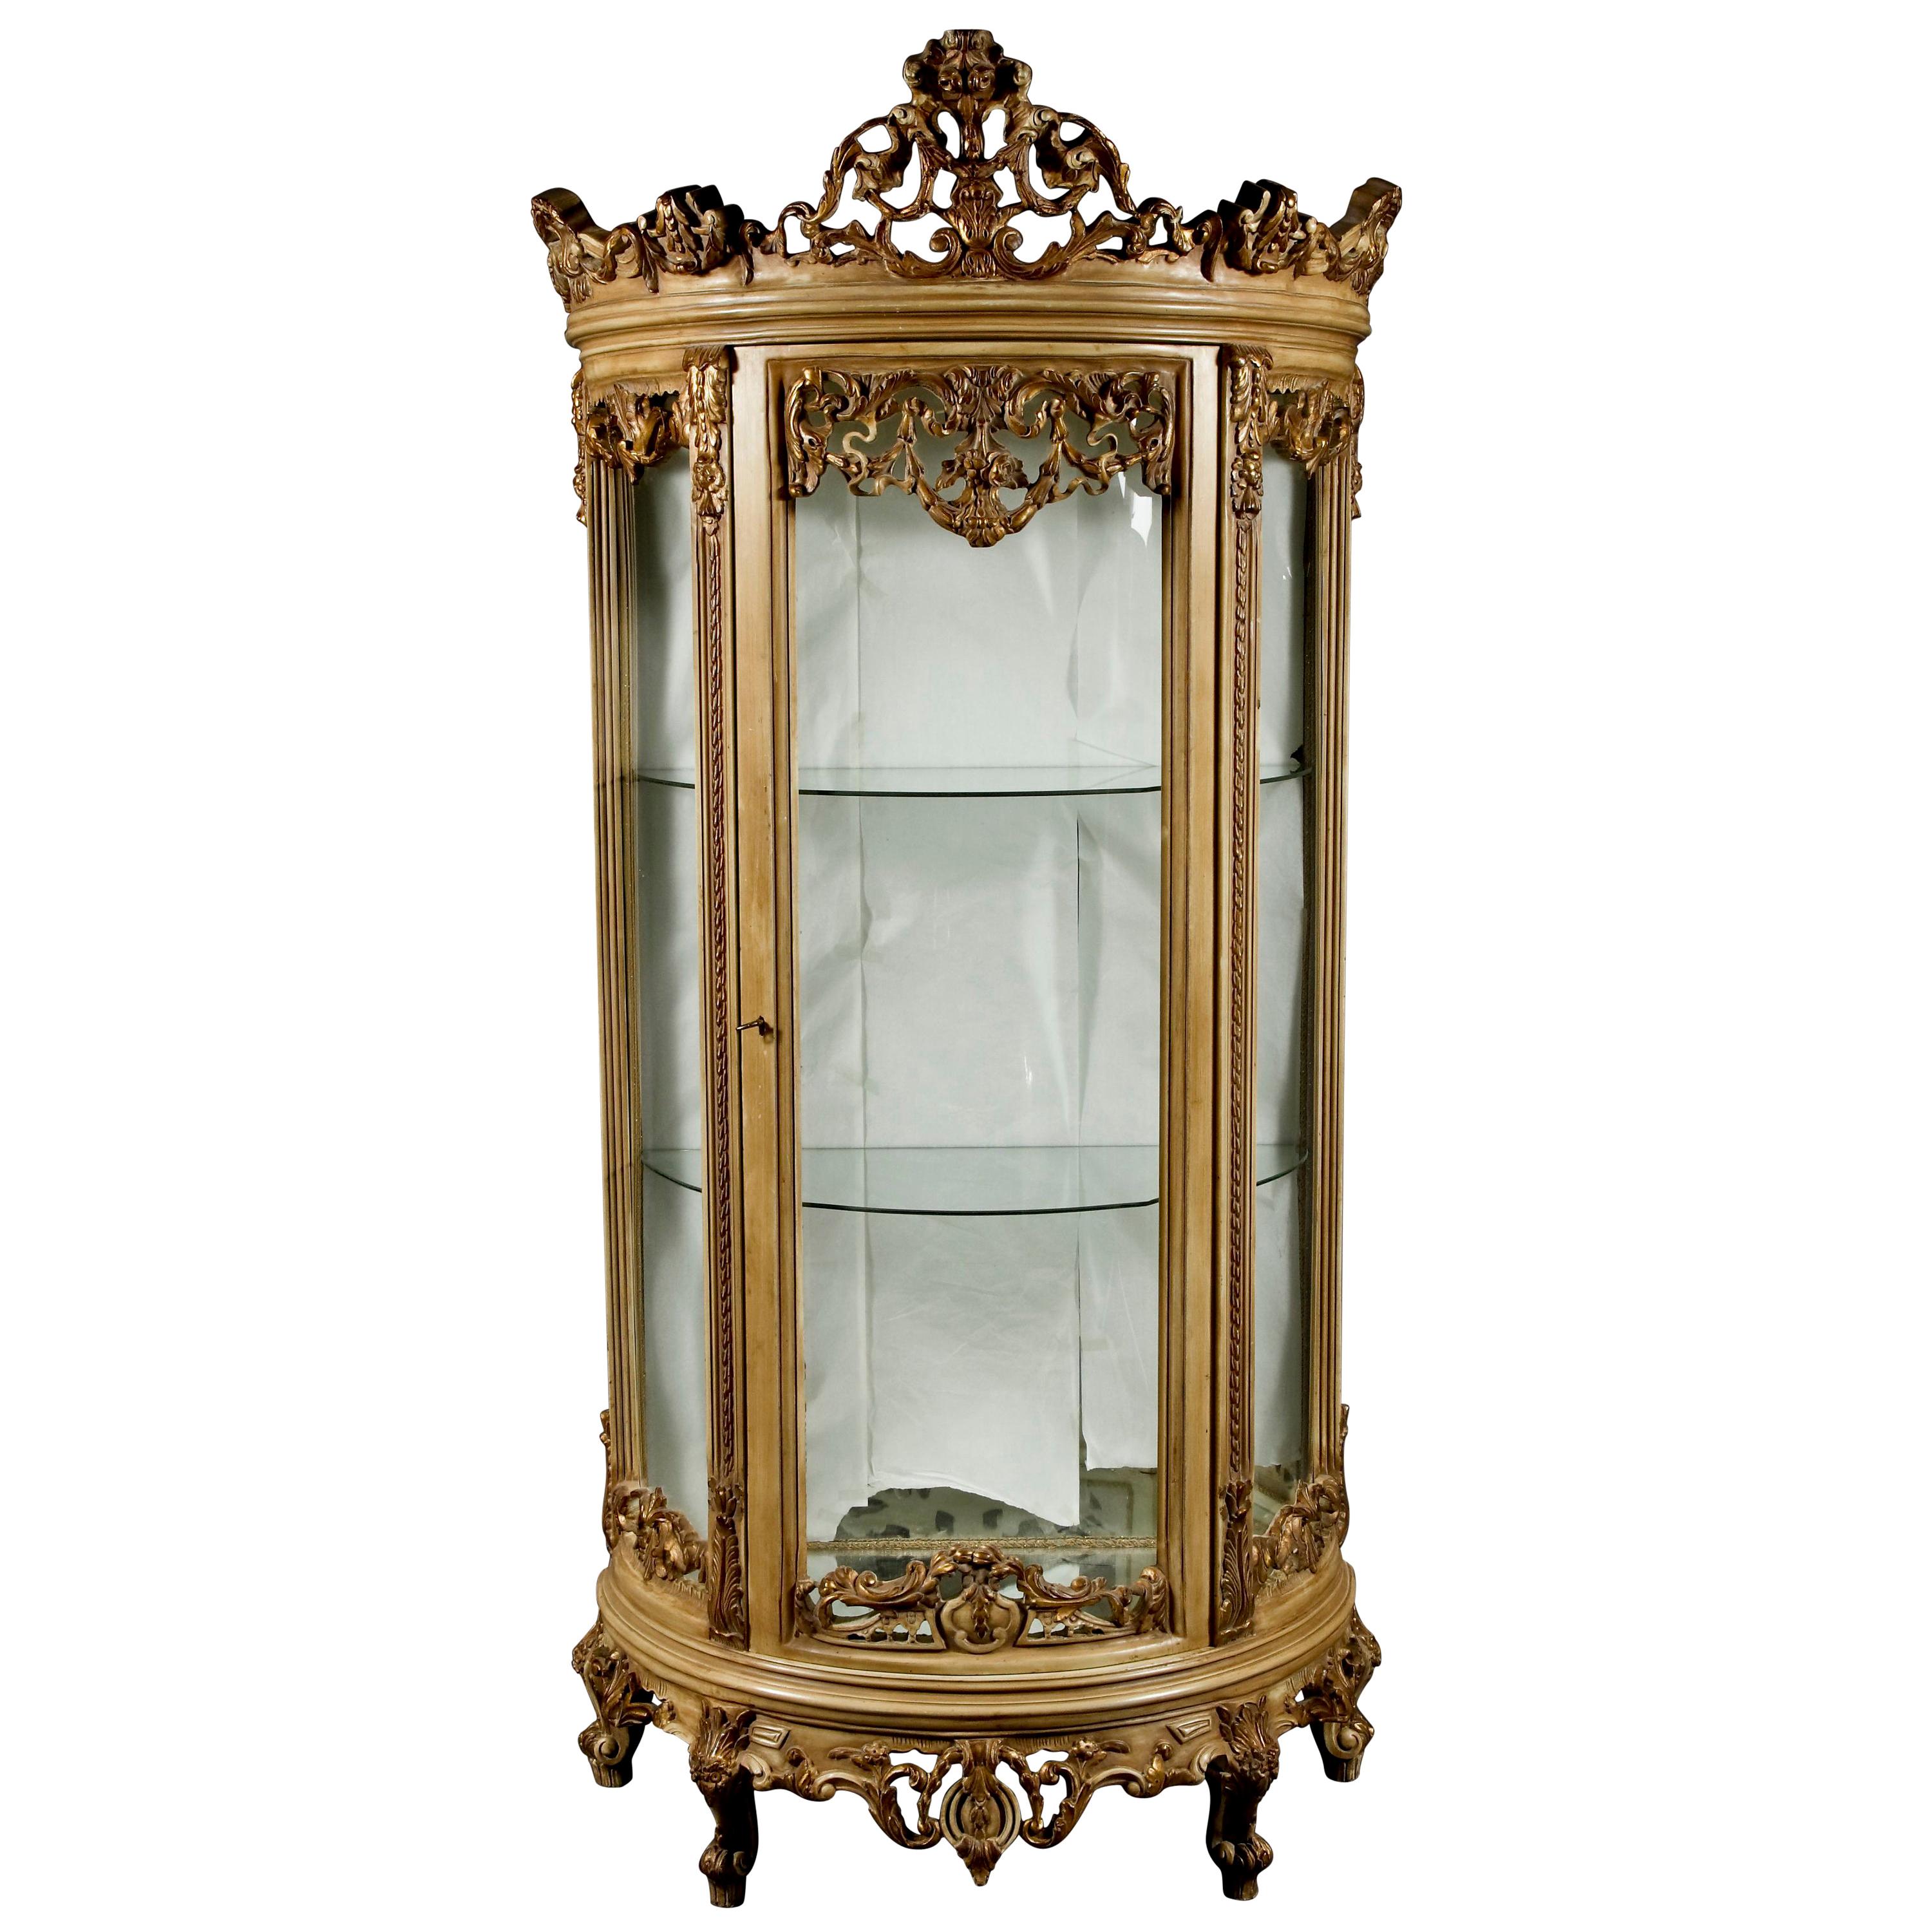 20th Century French Curved-Feet Vitrine For Sale